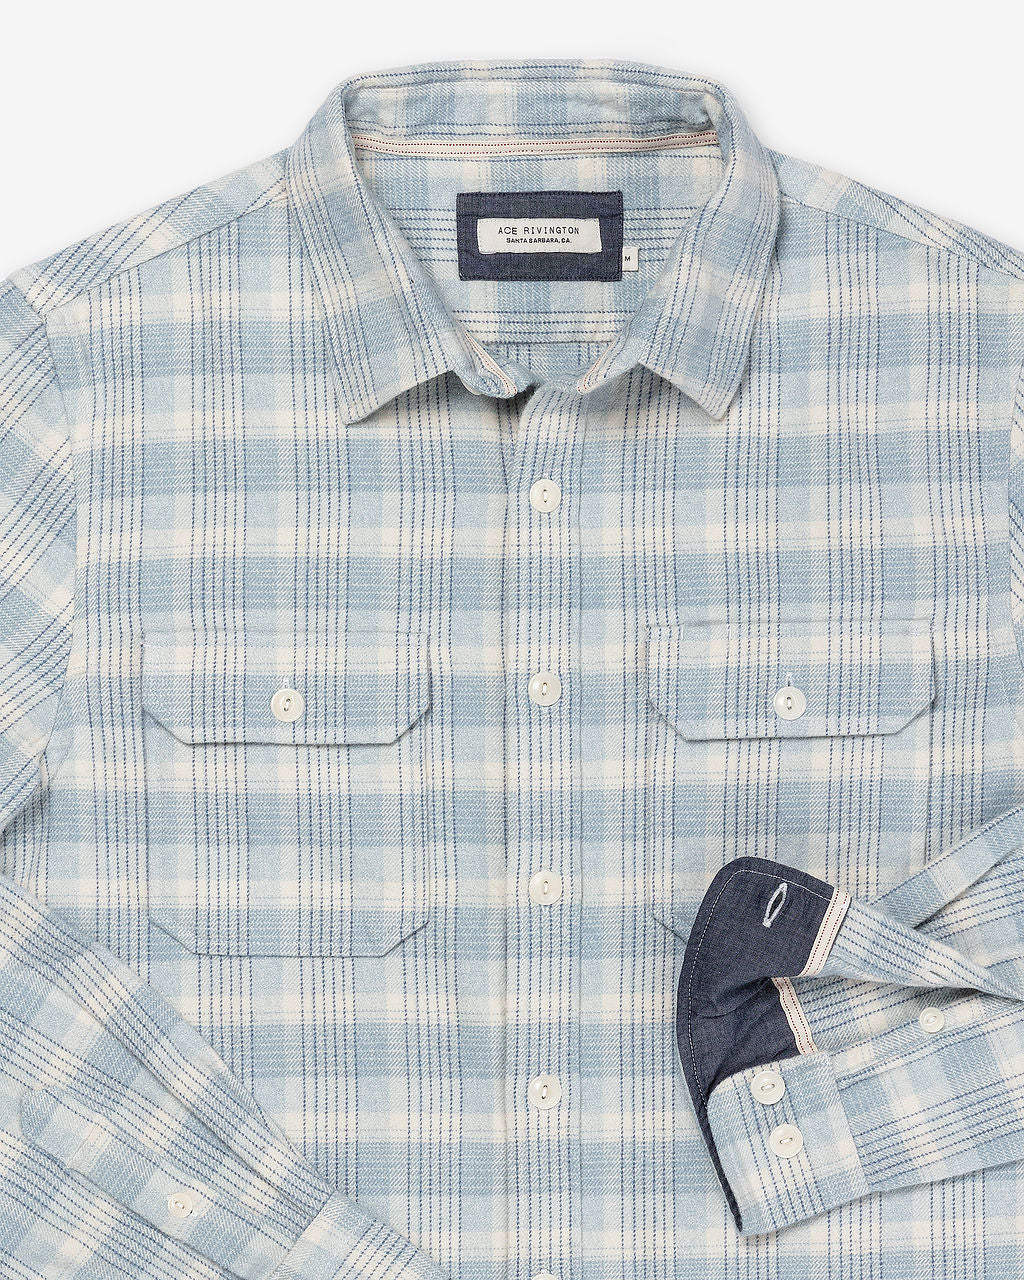 Zoomed-in details of the inside of sleeve, tag, buttons, collar, and breast pockets on Ace Rivington soft-brushed flannel shirt with pearl buttons and off-white and light blue and black checkered grid plaid design with pearl buttons and double breast pockets with buttoned enclosure